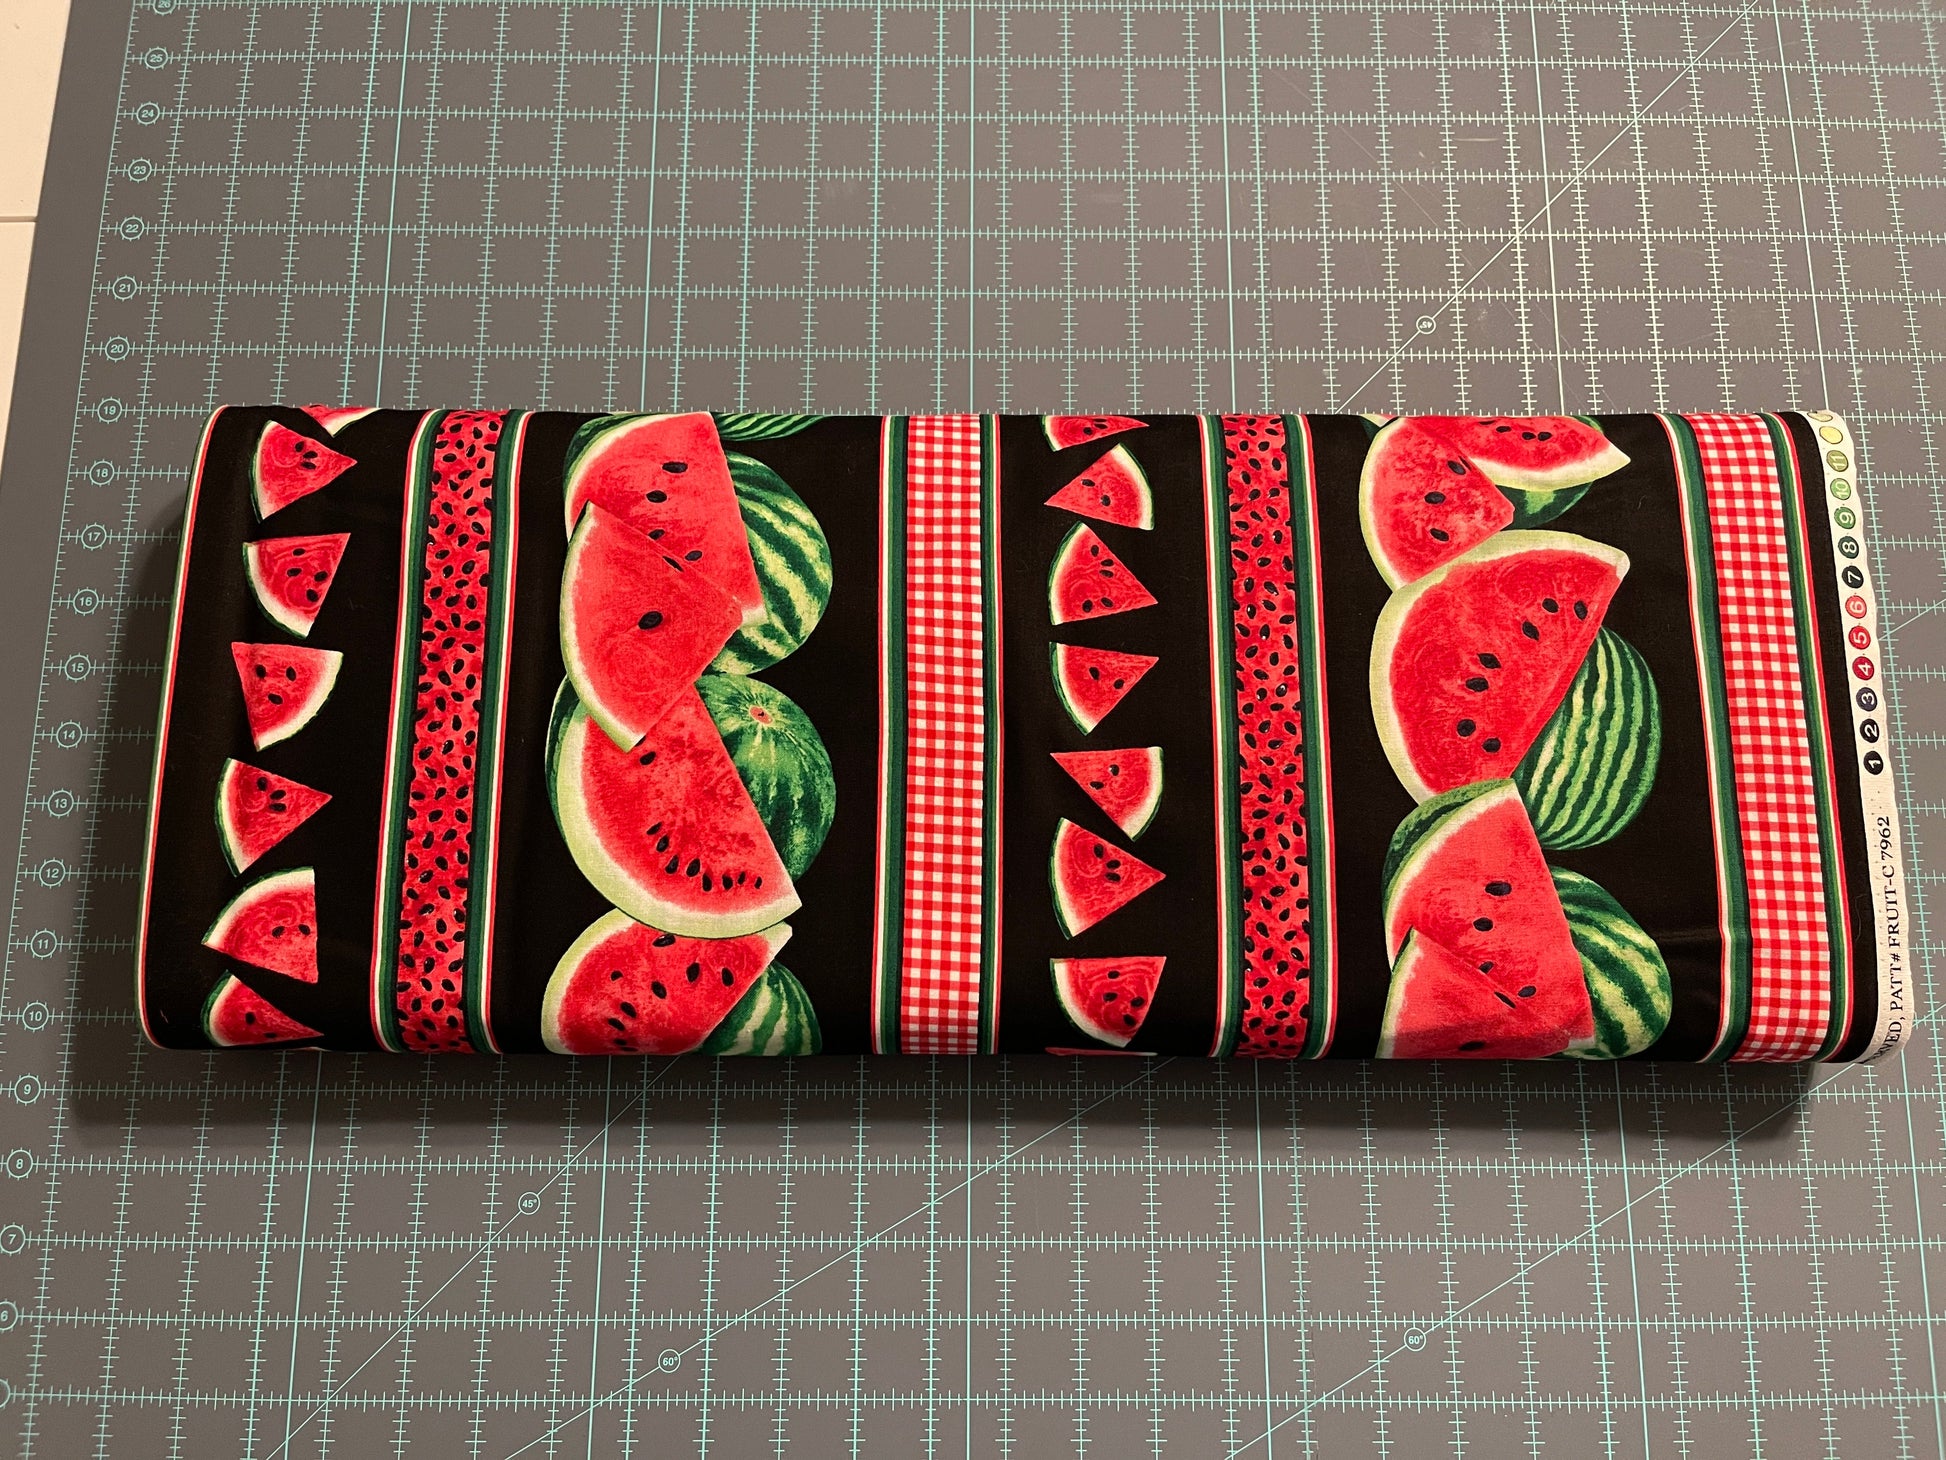 Timeless Treasures Fabric Watermelon Fabric Bundles (10 pieces) by Timeless Treasures (FQ, 1/2 yard & 1 yard choices)